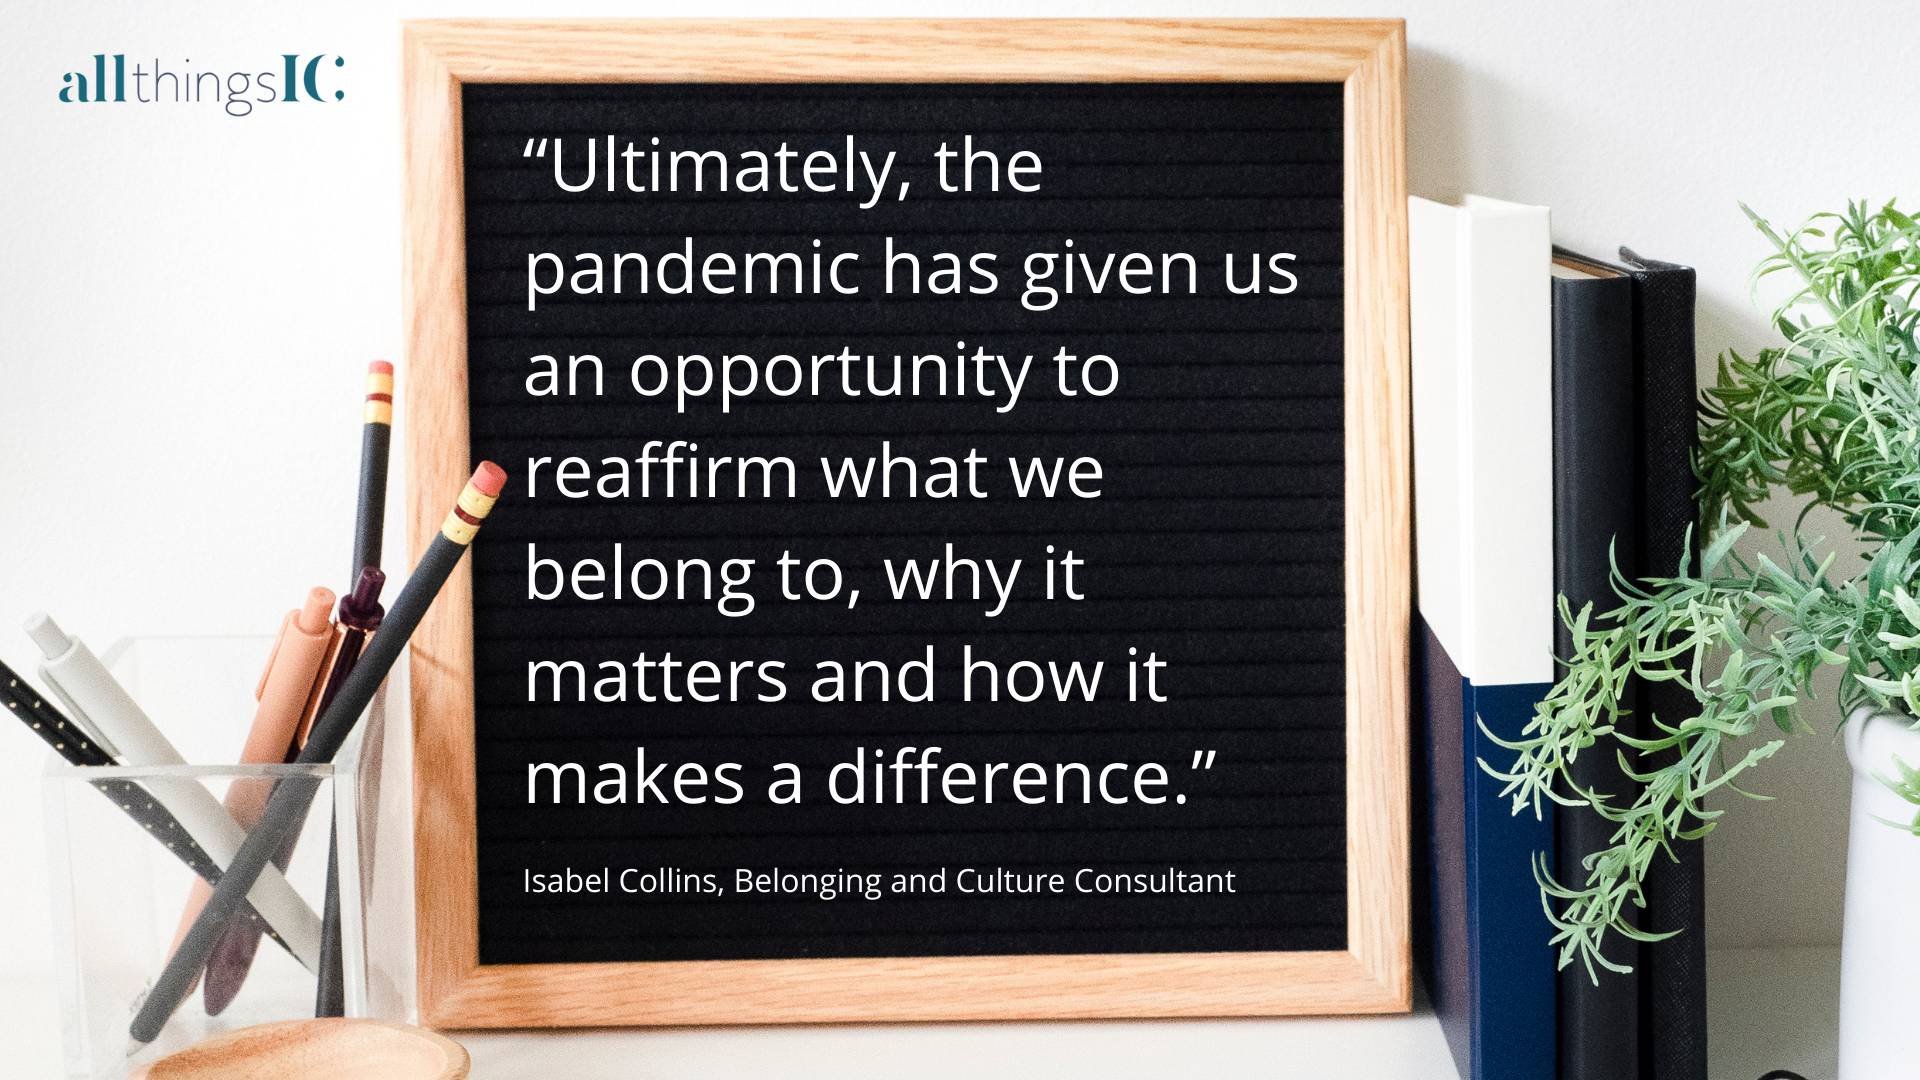 “Ultimately, the pandemic has given us an opportunity to reaffirm what we belong to, why it matters and how it makes a difference.”